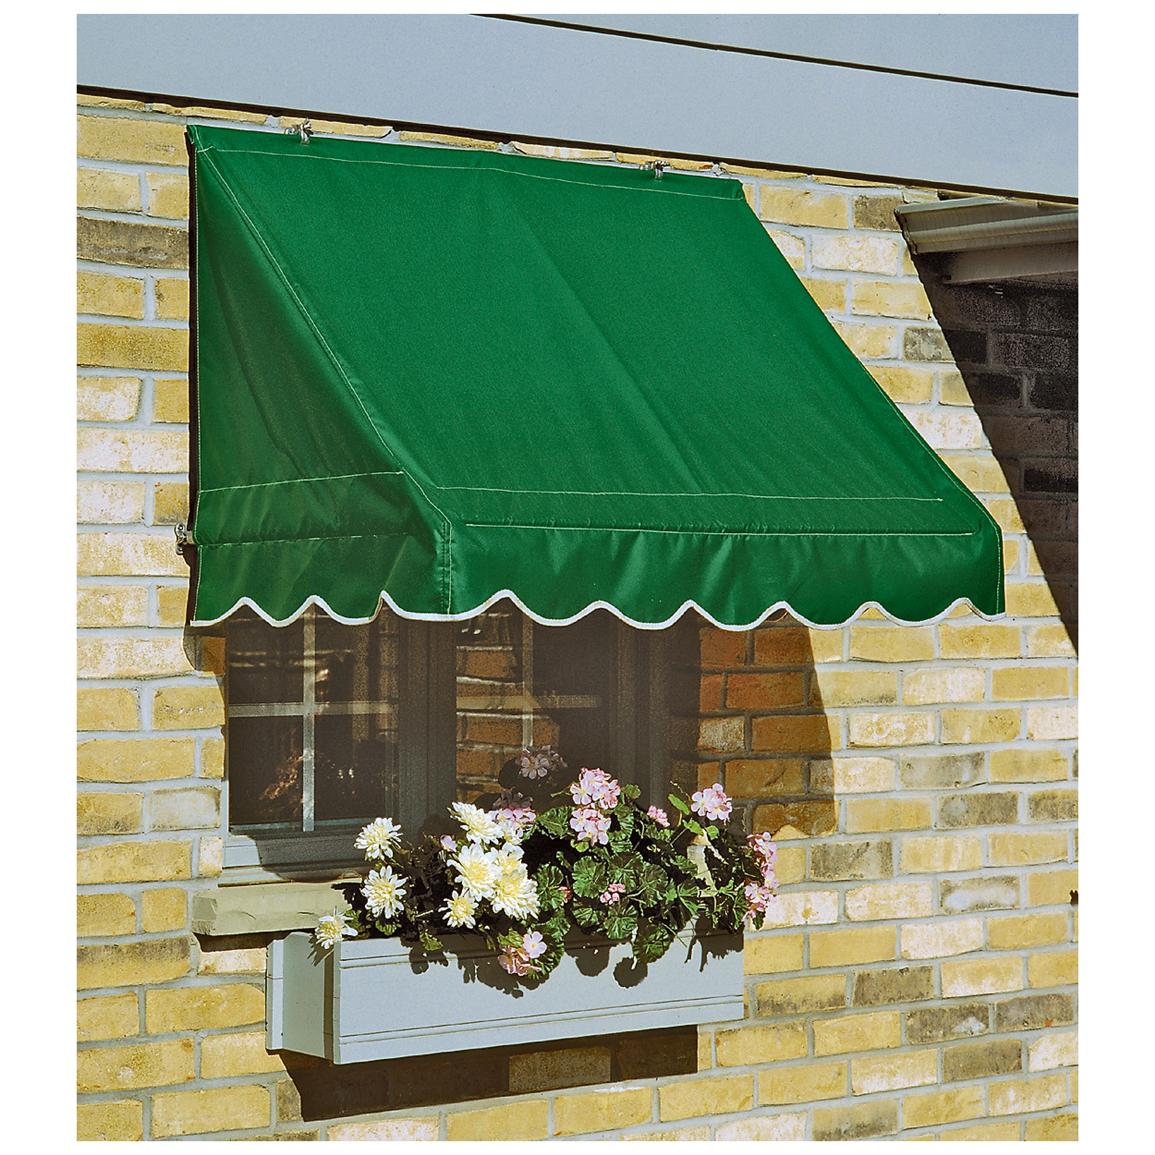 CASTLECREEK 4 Window And Door Awning 581816 Awnings Shades At